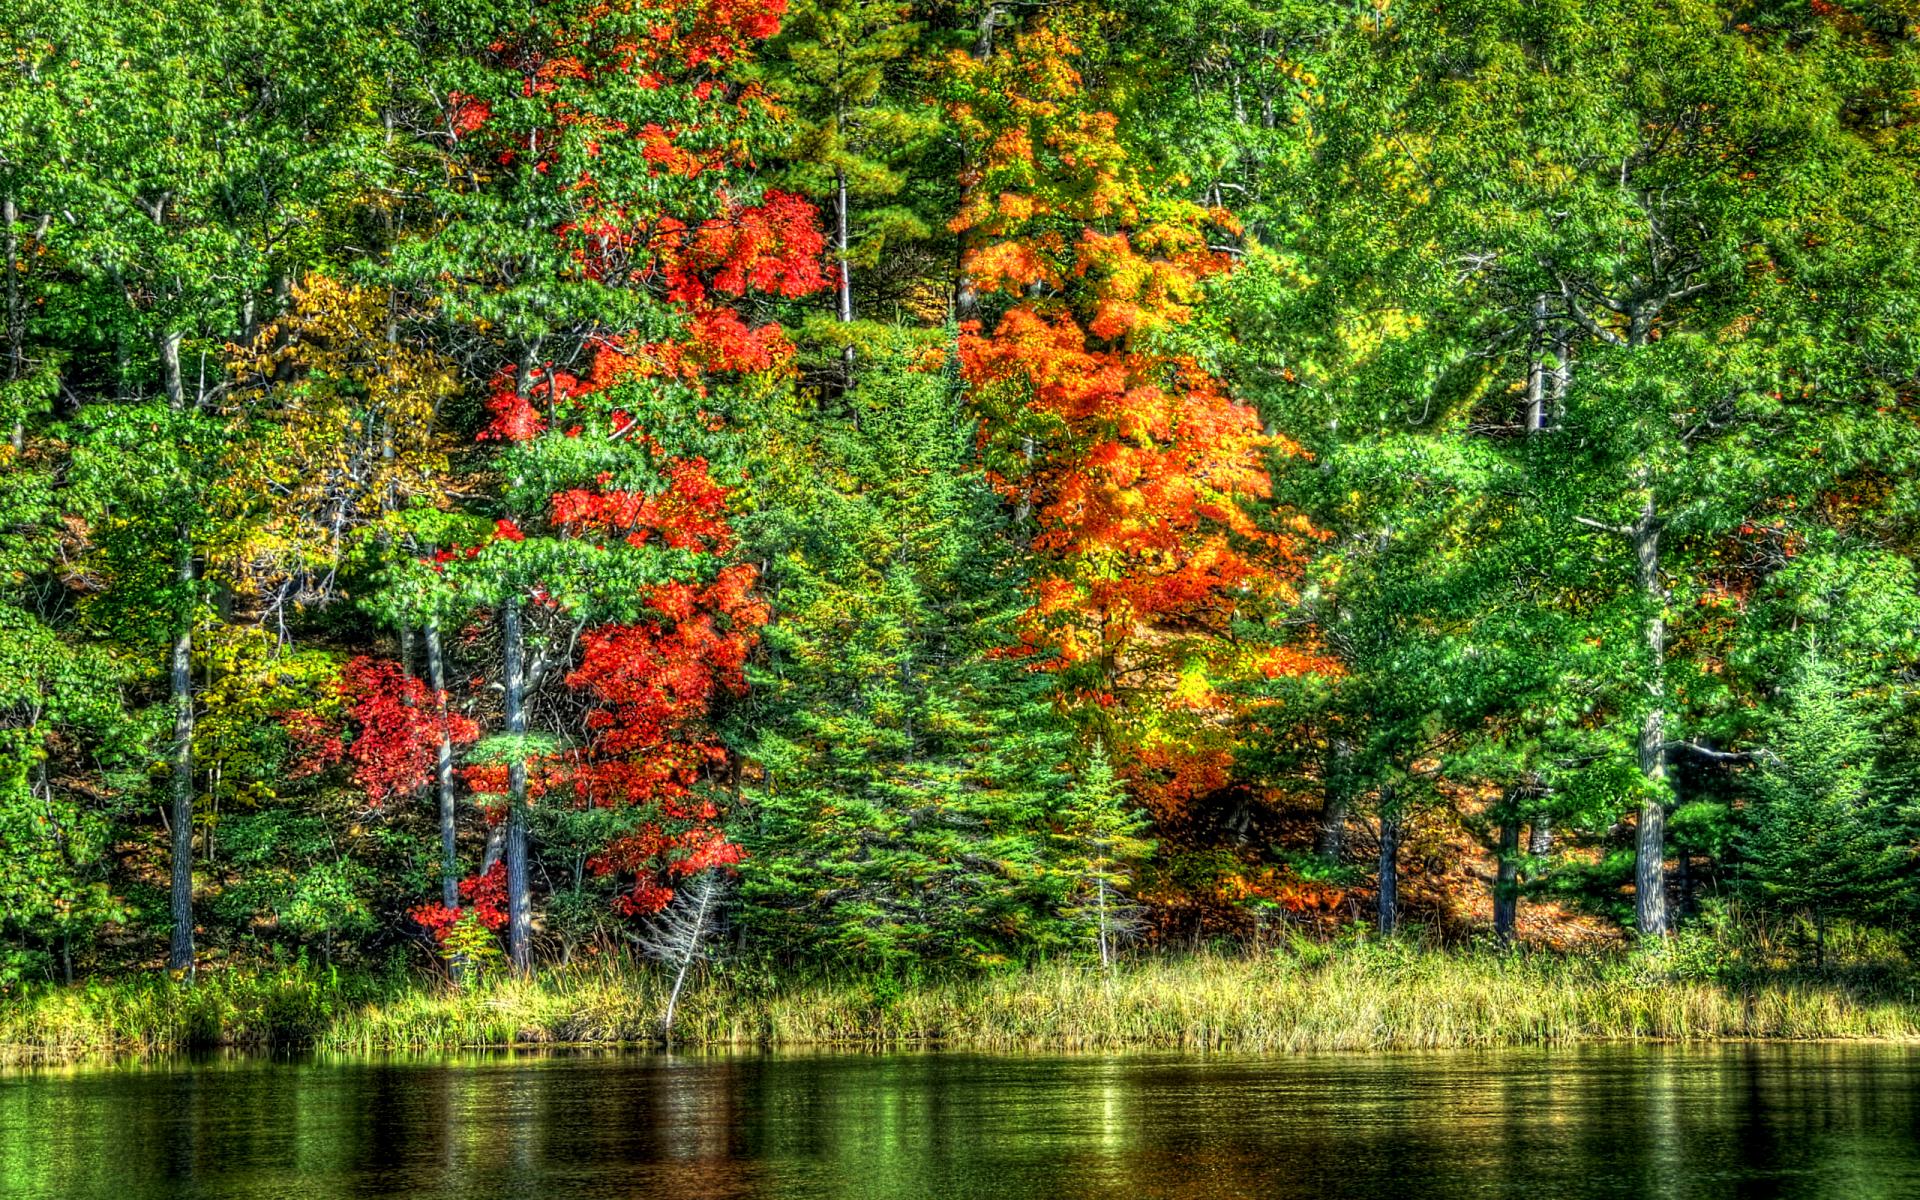 nature, Landscapes, Trees, Forests, Hdr, Autumn, Fall, Seasons, Leaves, Color, Contrast, Shore, Lake, Pond, Rivers, Water, Reflection, Scenic Wallpaper